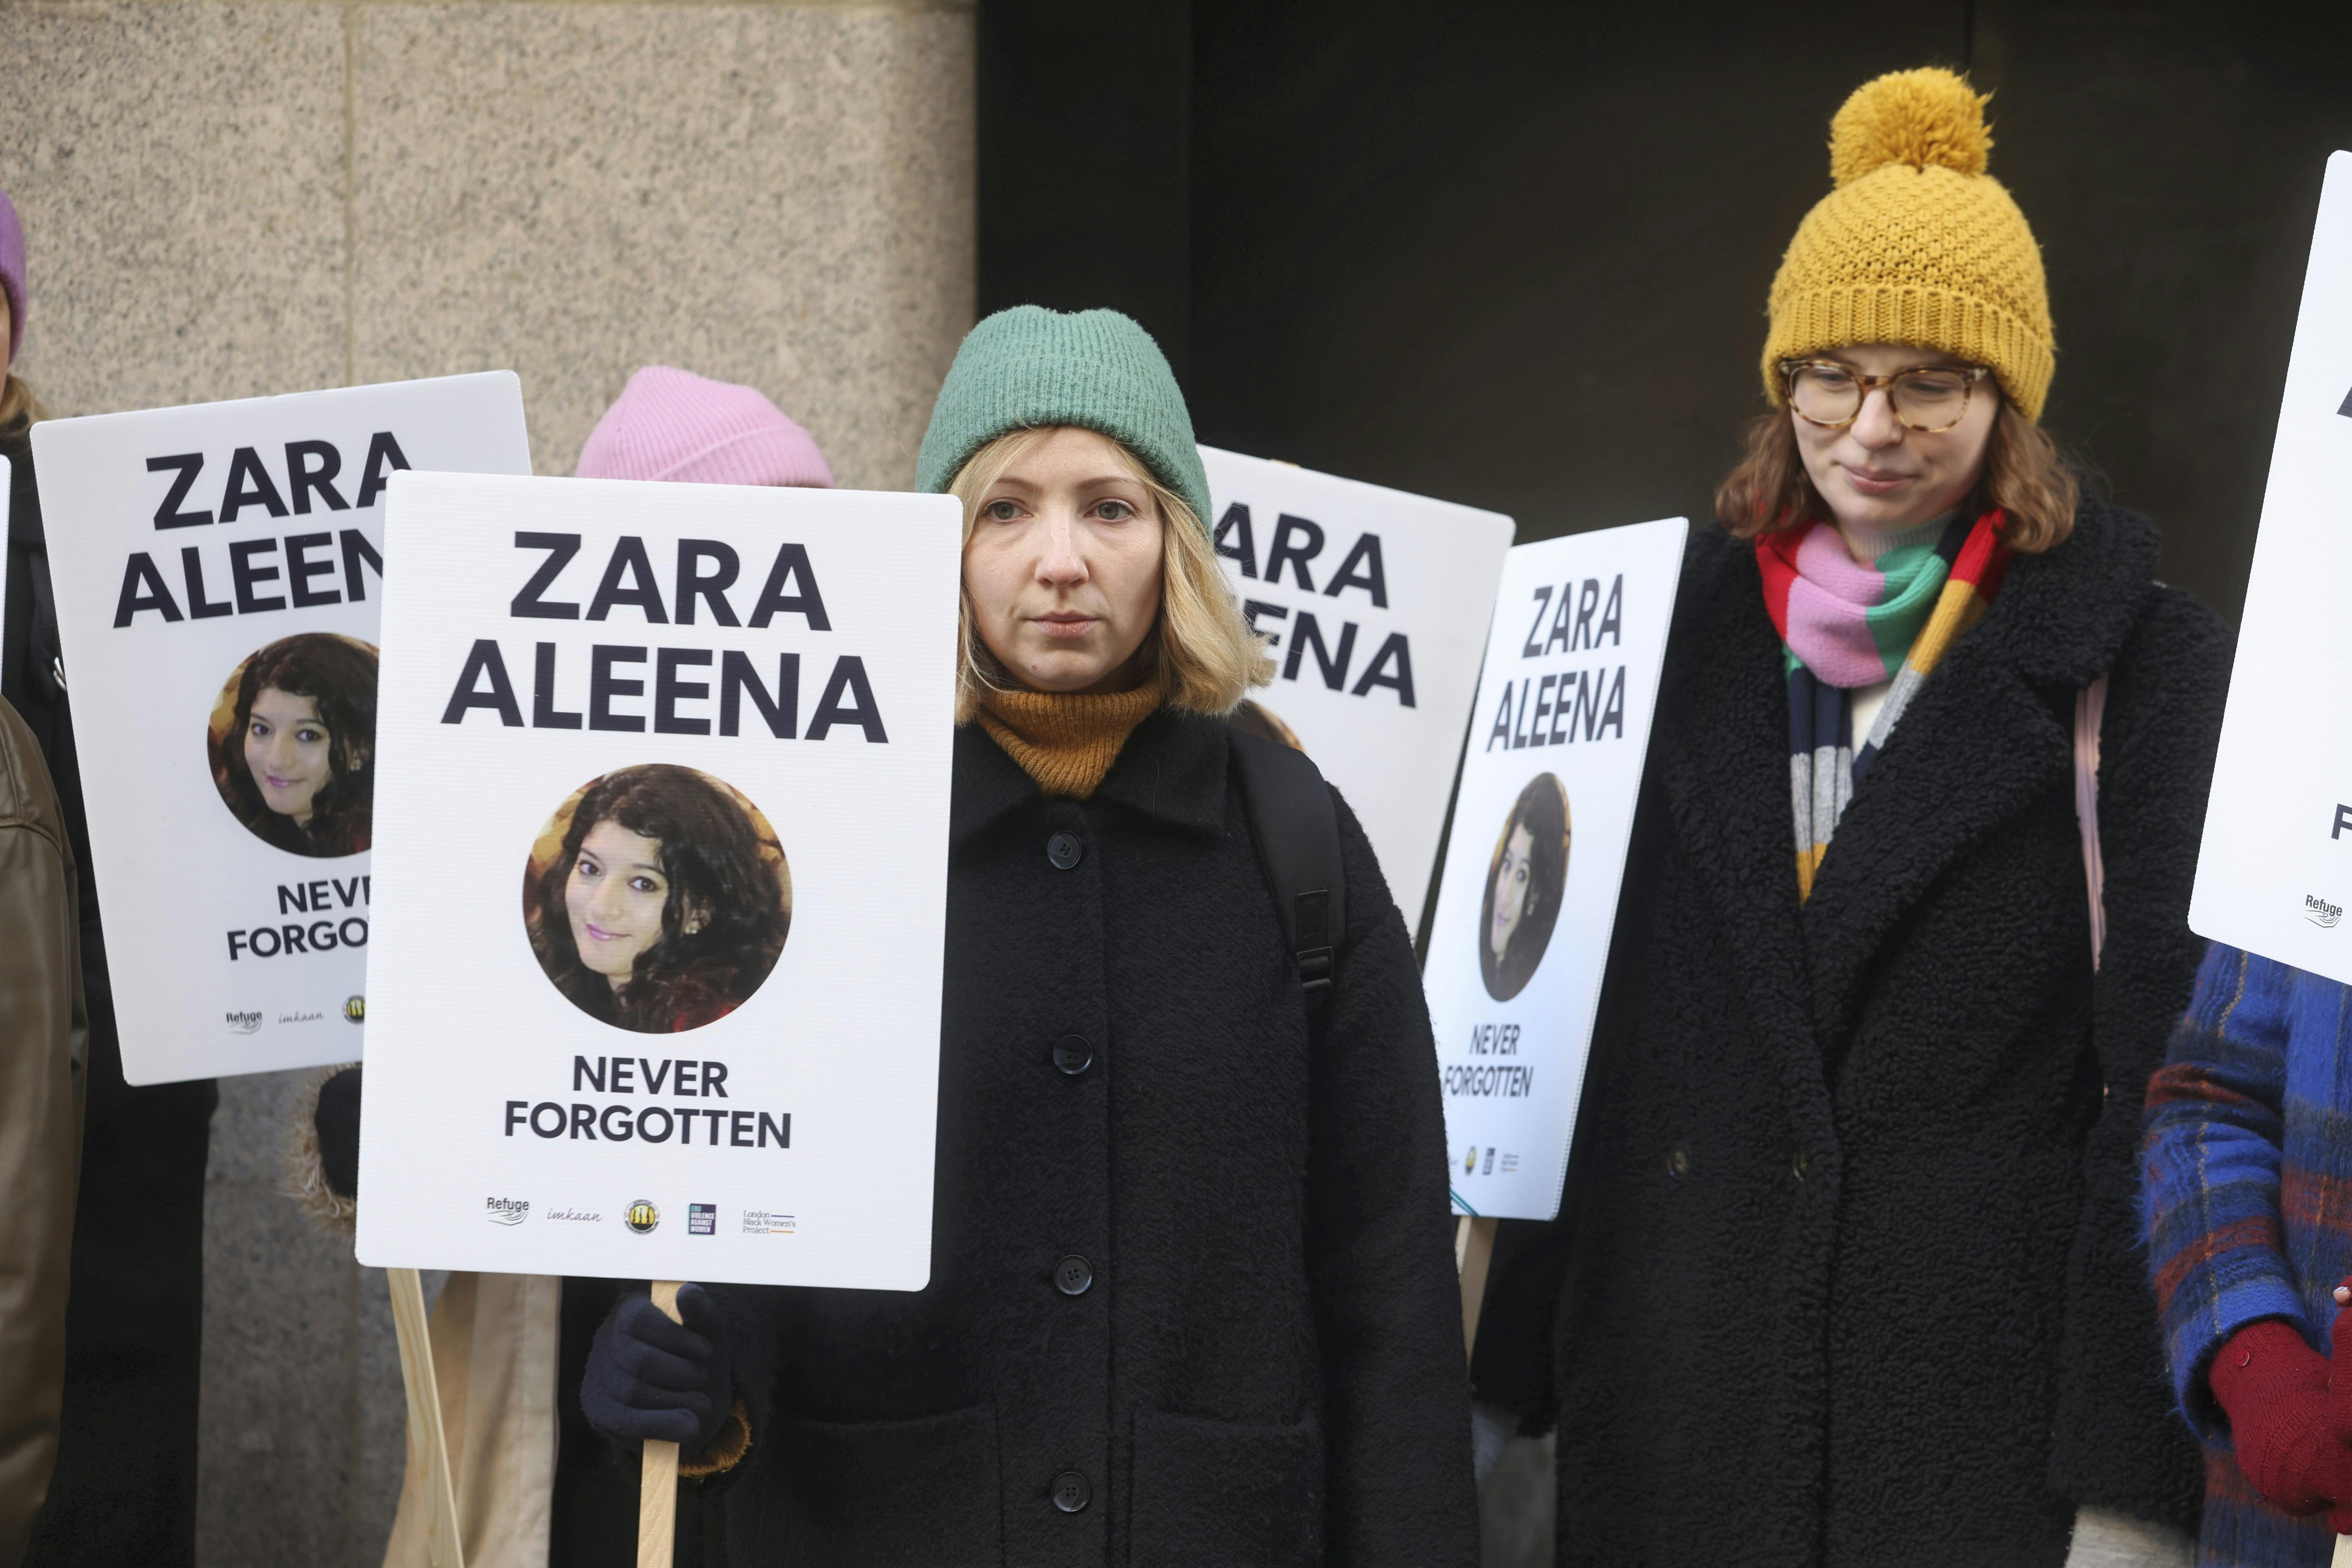 Protesters from Million Women Rise gather outside the Old Bailey in London, ahead of the sentencing of Jordan McSweeney for the murder of law graduate Zara Aleena.
